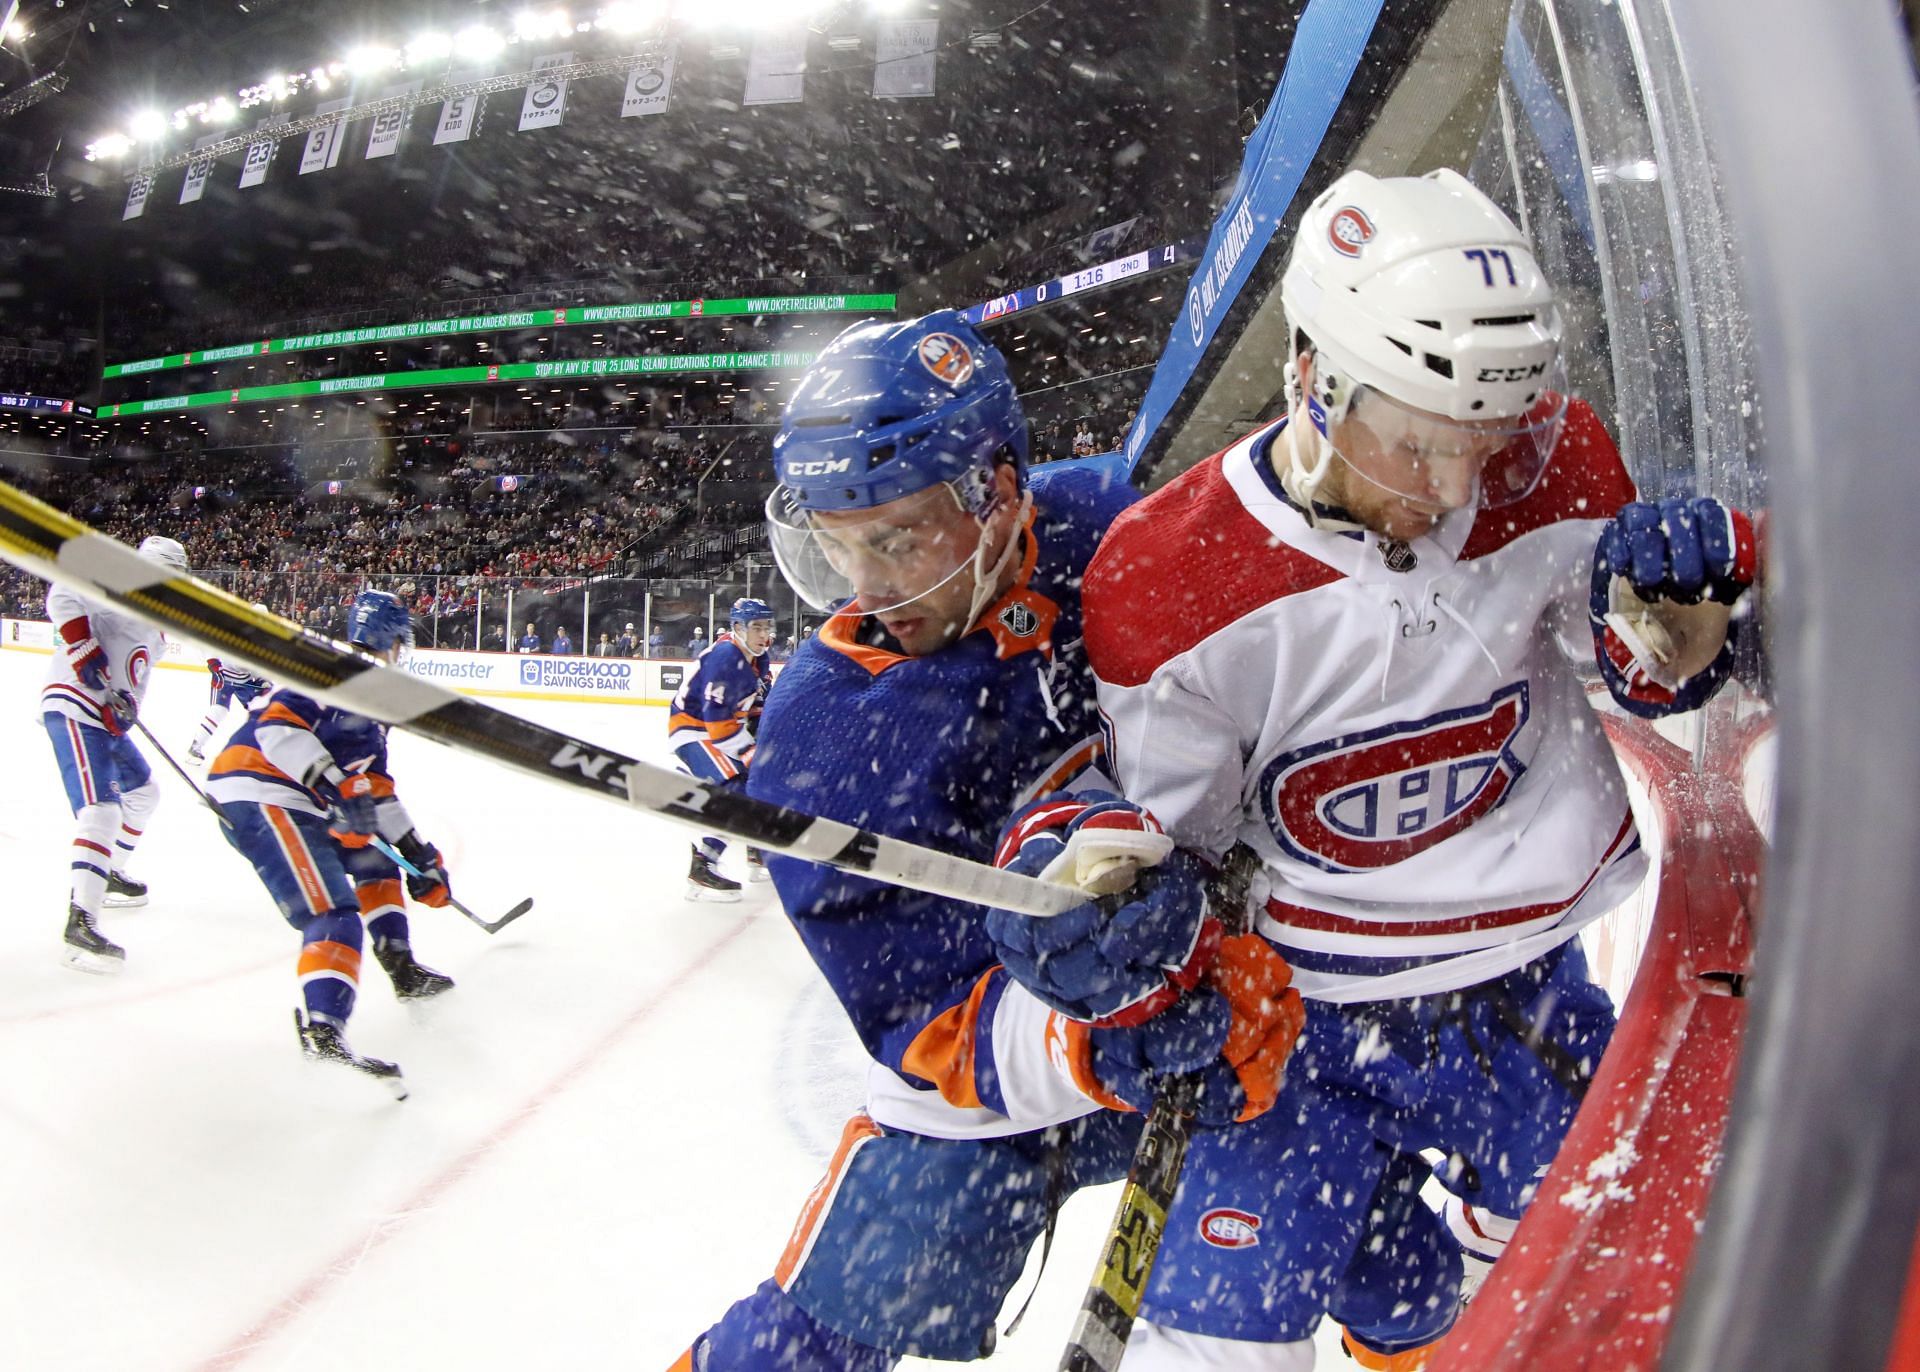 New York Islanders vs. Montreal Canadiens Live streaming options, how